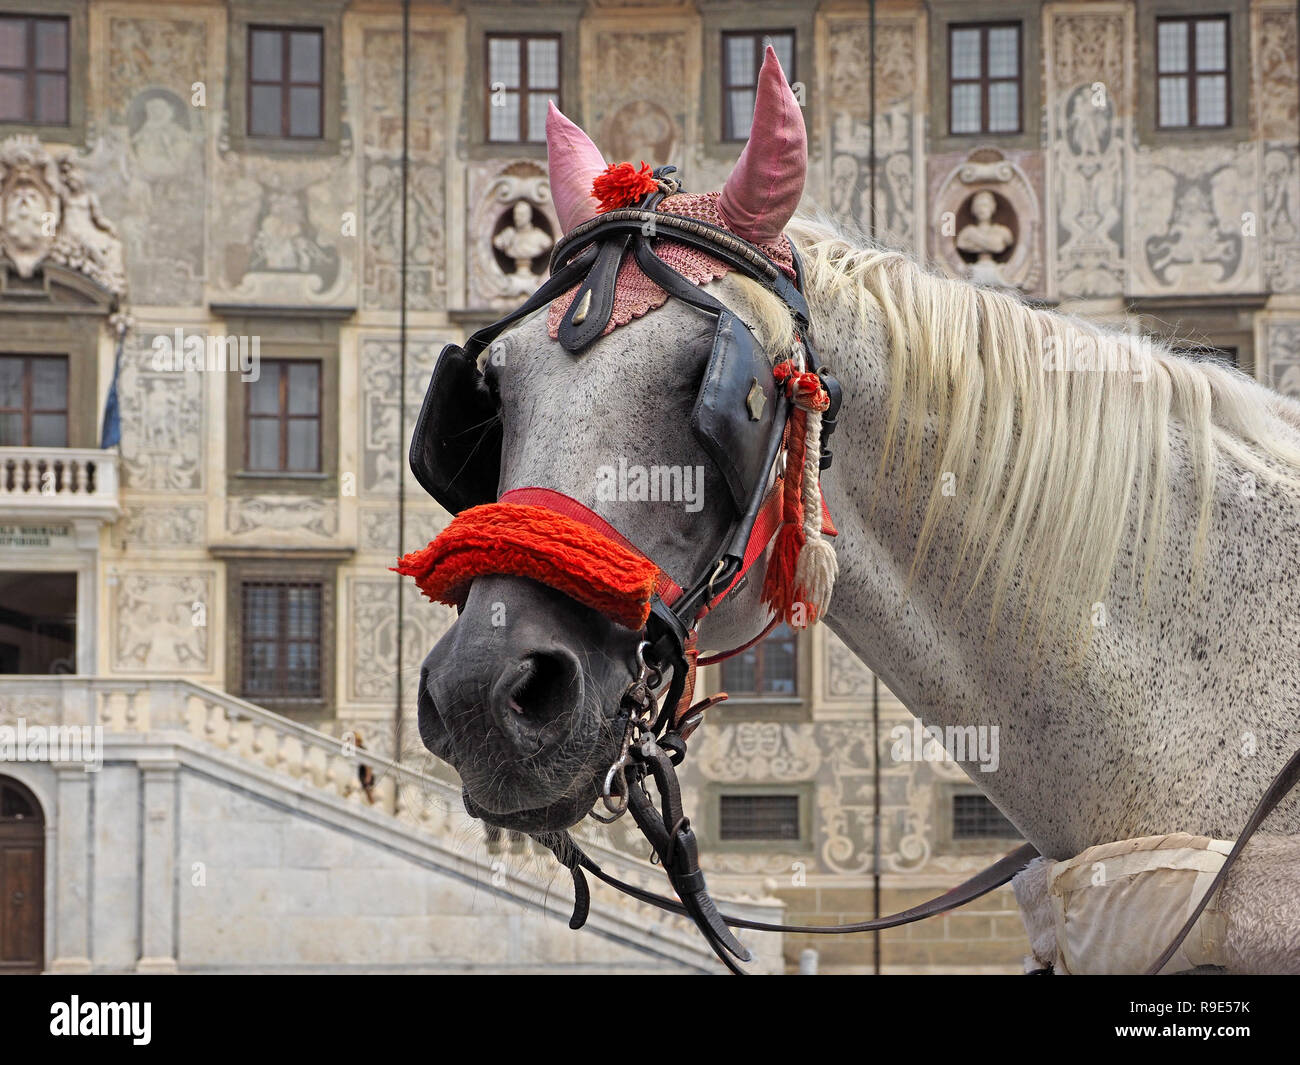 portrait of white horse decorated with pink earpieces and red nose band standing in Piazza dei Cavalieri for sightseeing carriage tours of Pisa, Italy Stock Photo